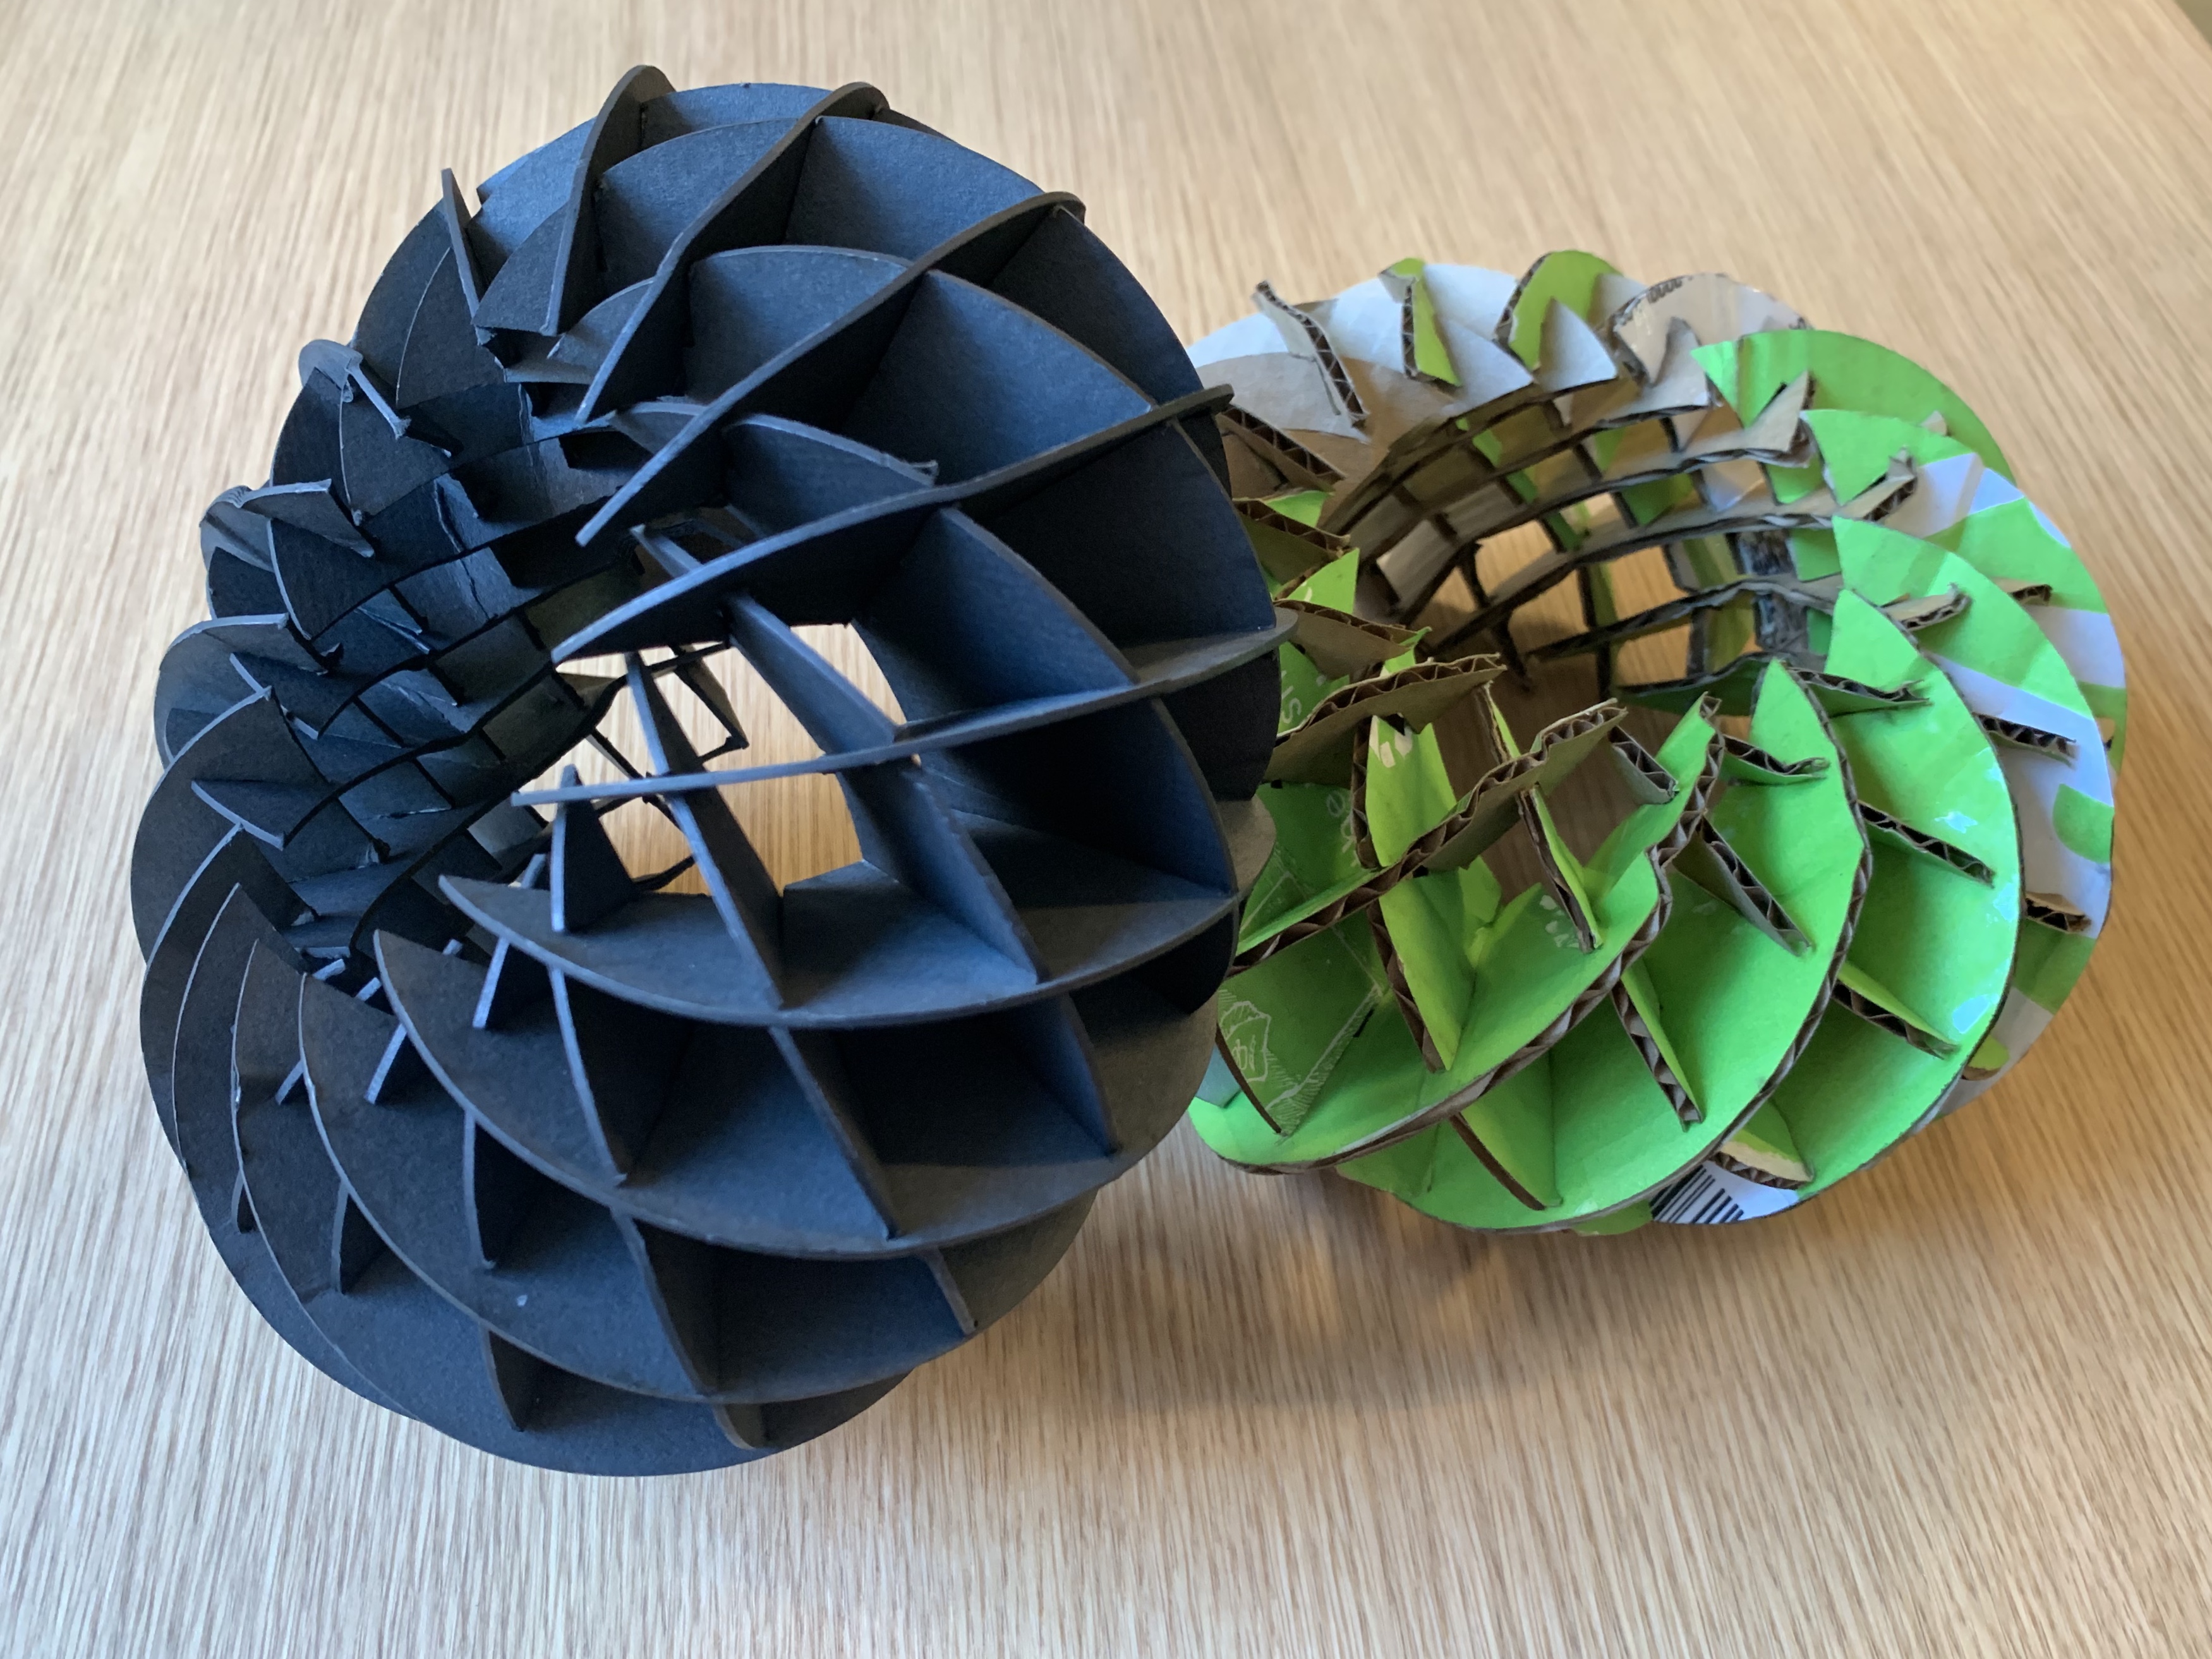 two round sculptures made of cardboard pieces laser cut into moon shapes with slots in them. One is black, one is green and brown.